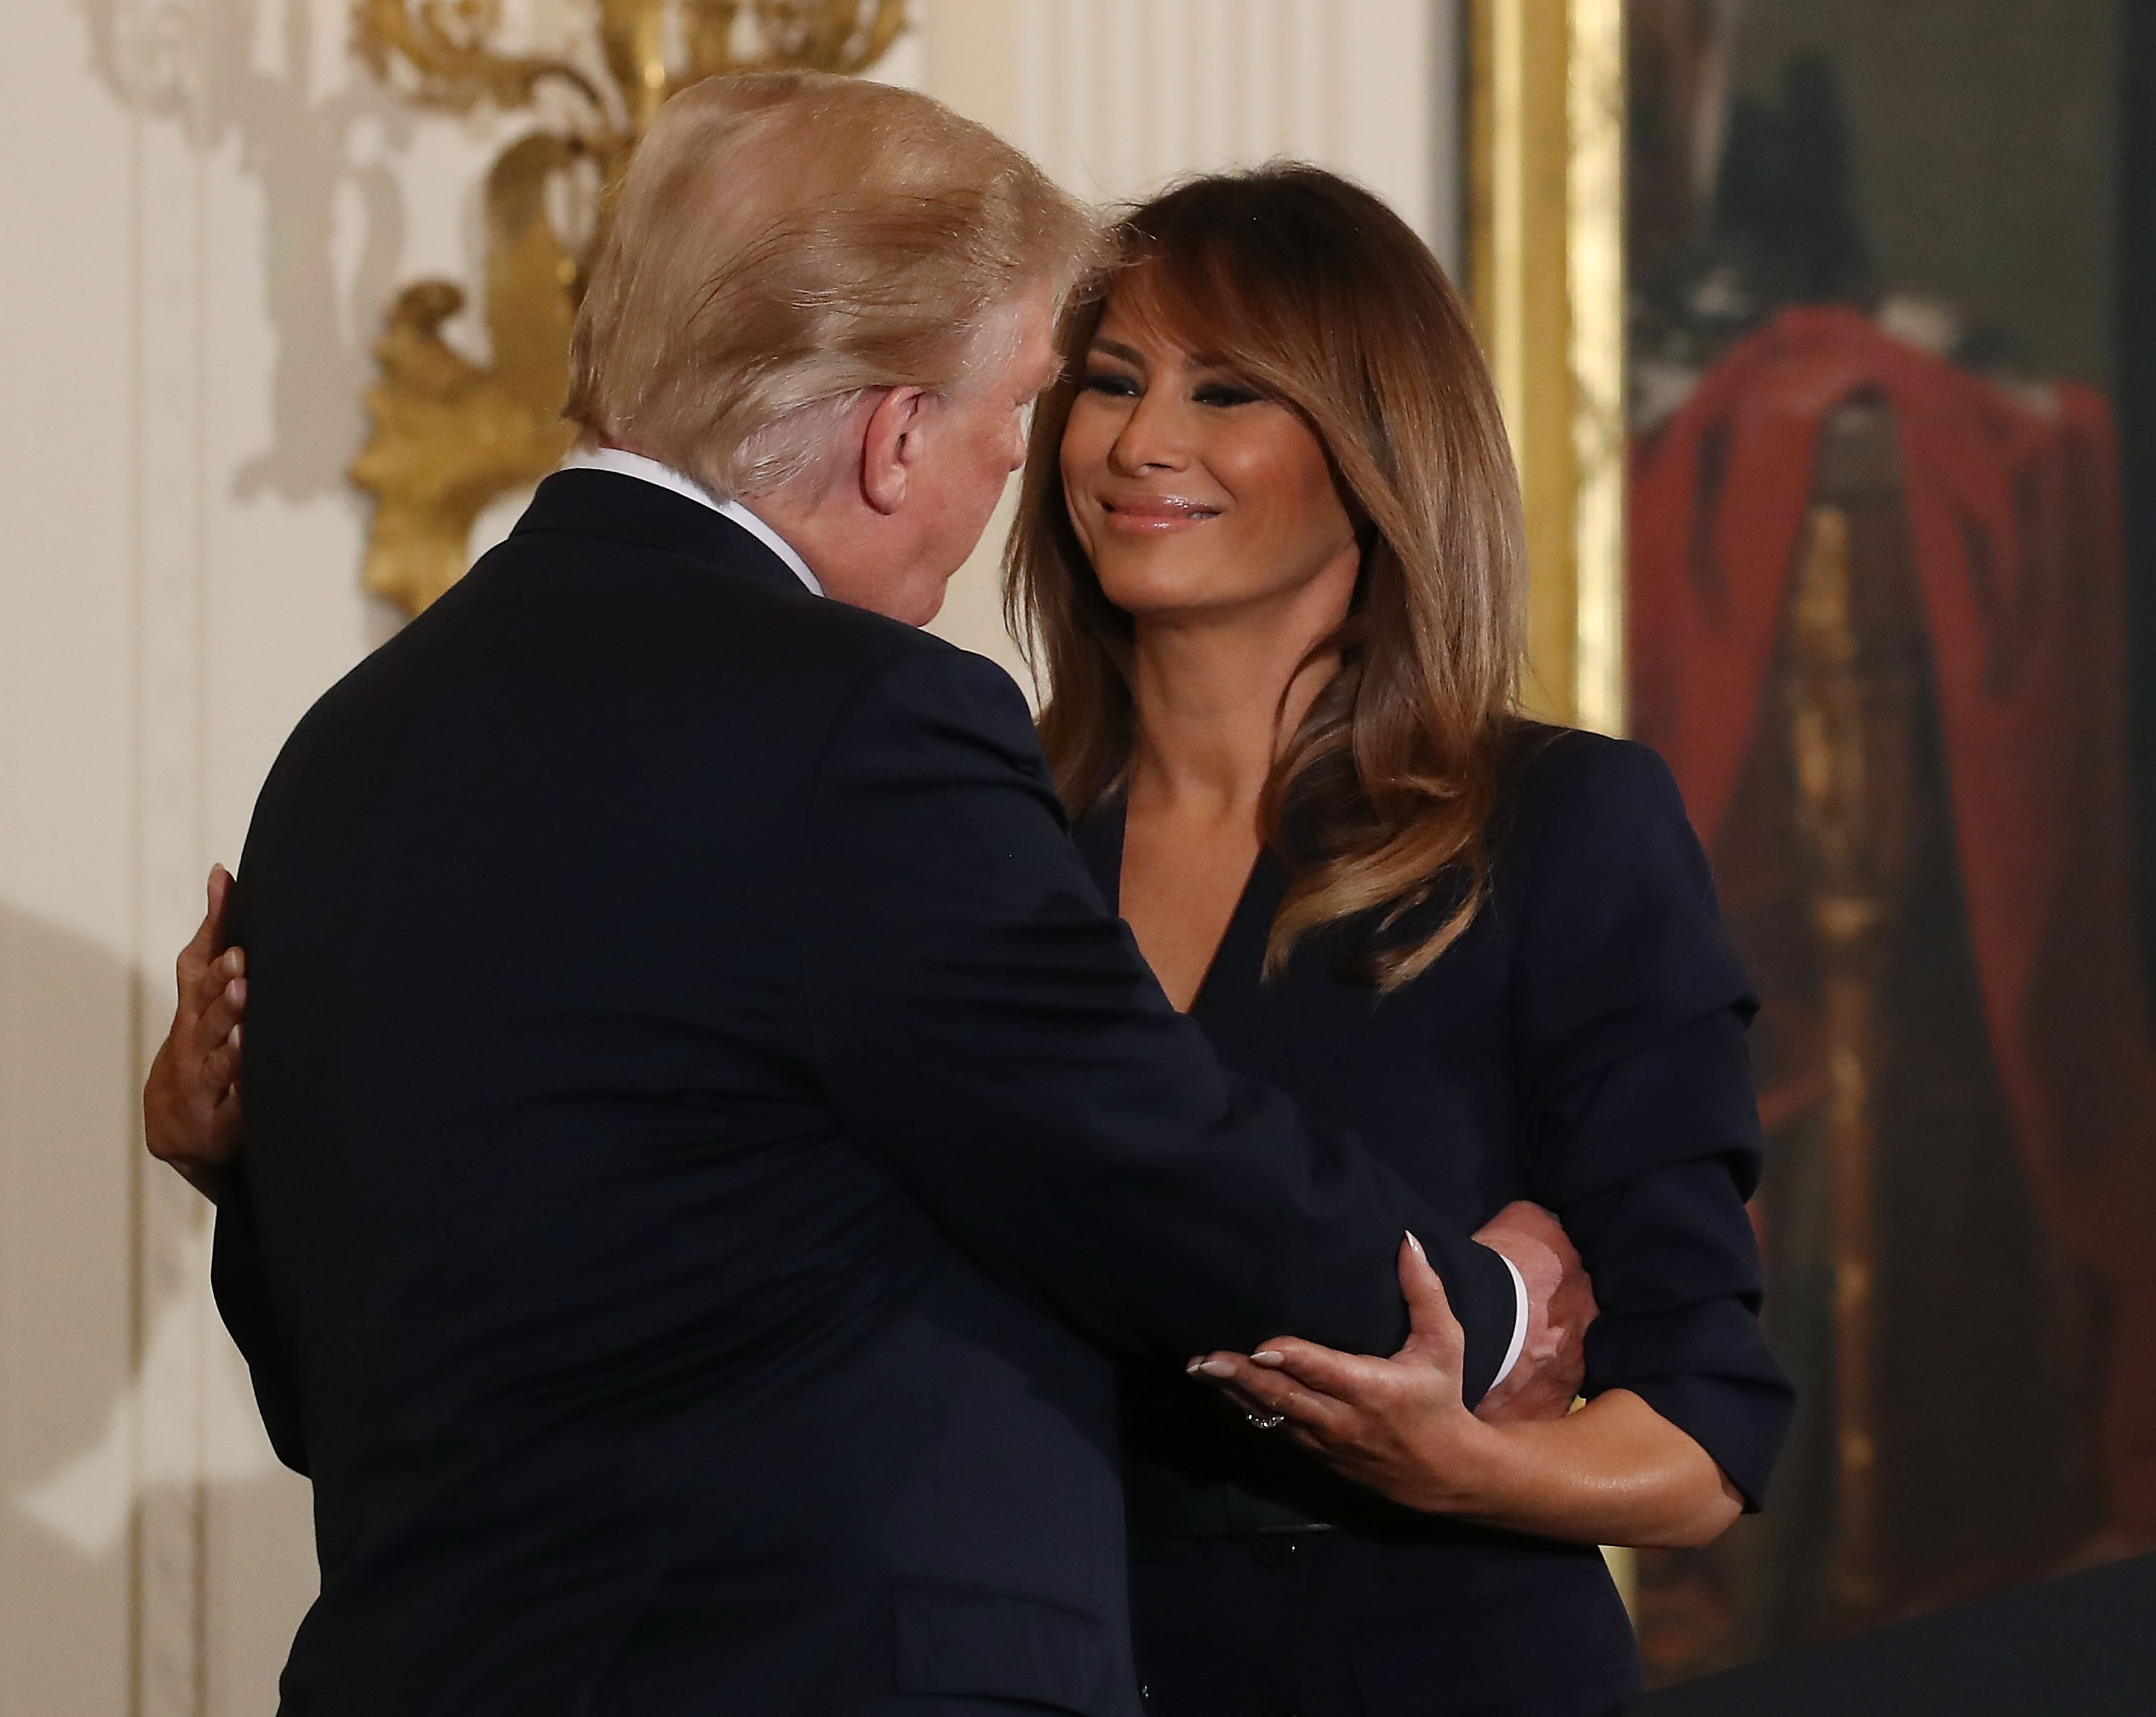 WASHINGTON, DC - MAY 09: U.S. President Donald Trump hugs first lady Melania Trump during an event to celebrate military mothers and spouses, in The East Room at the White House on May 9, 2018 in Washington, DC. (Photo by Mark Wilson/Getty Images)